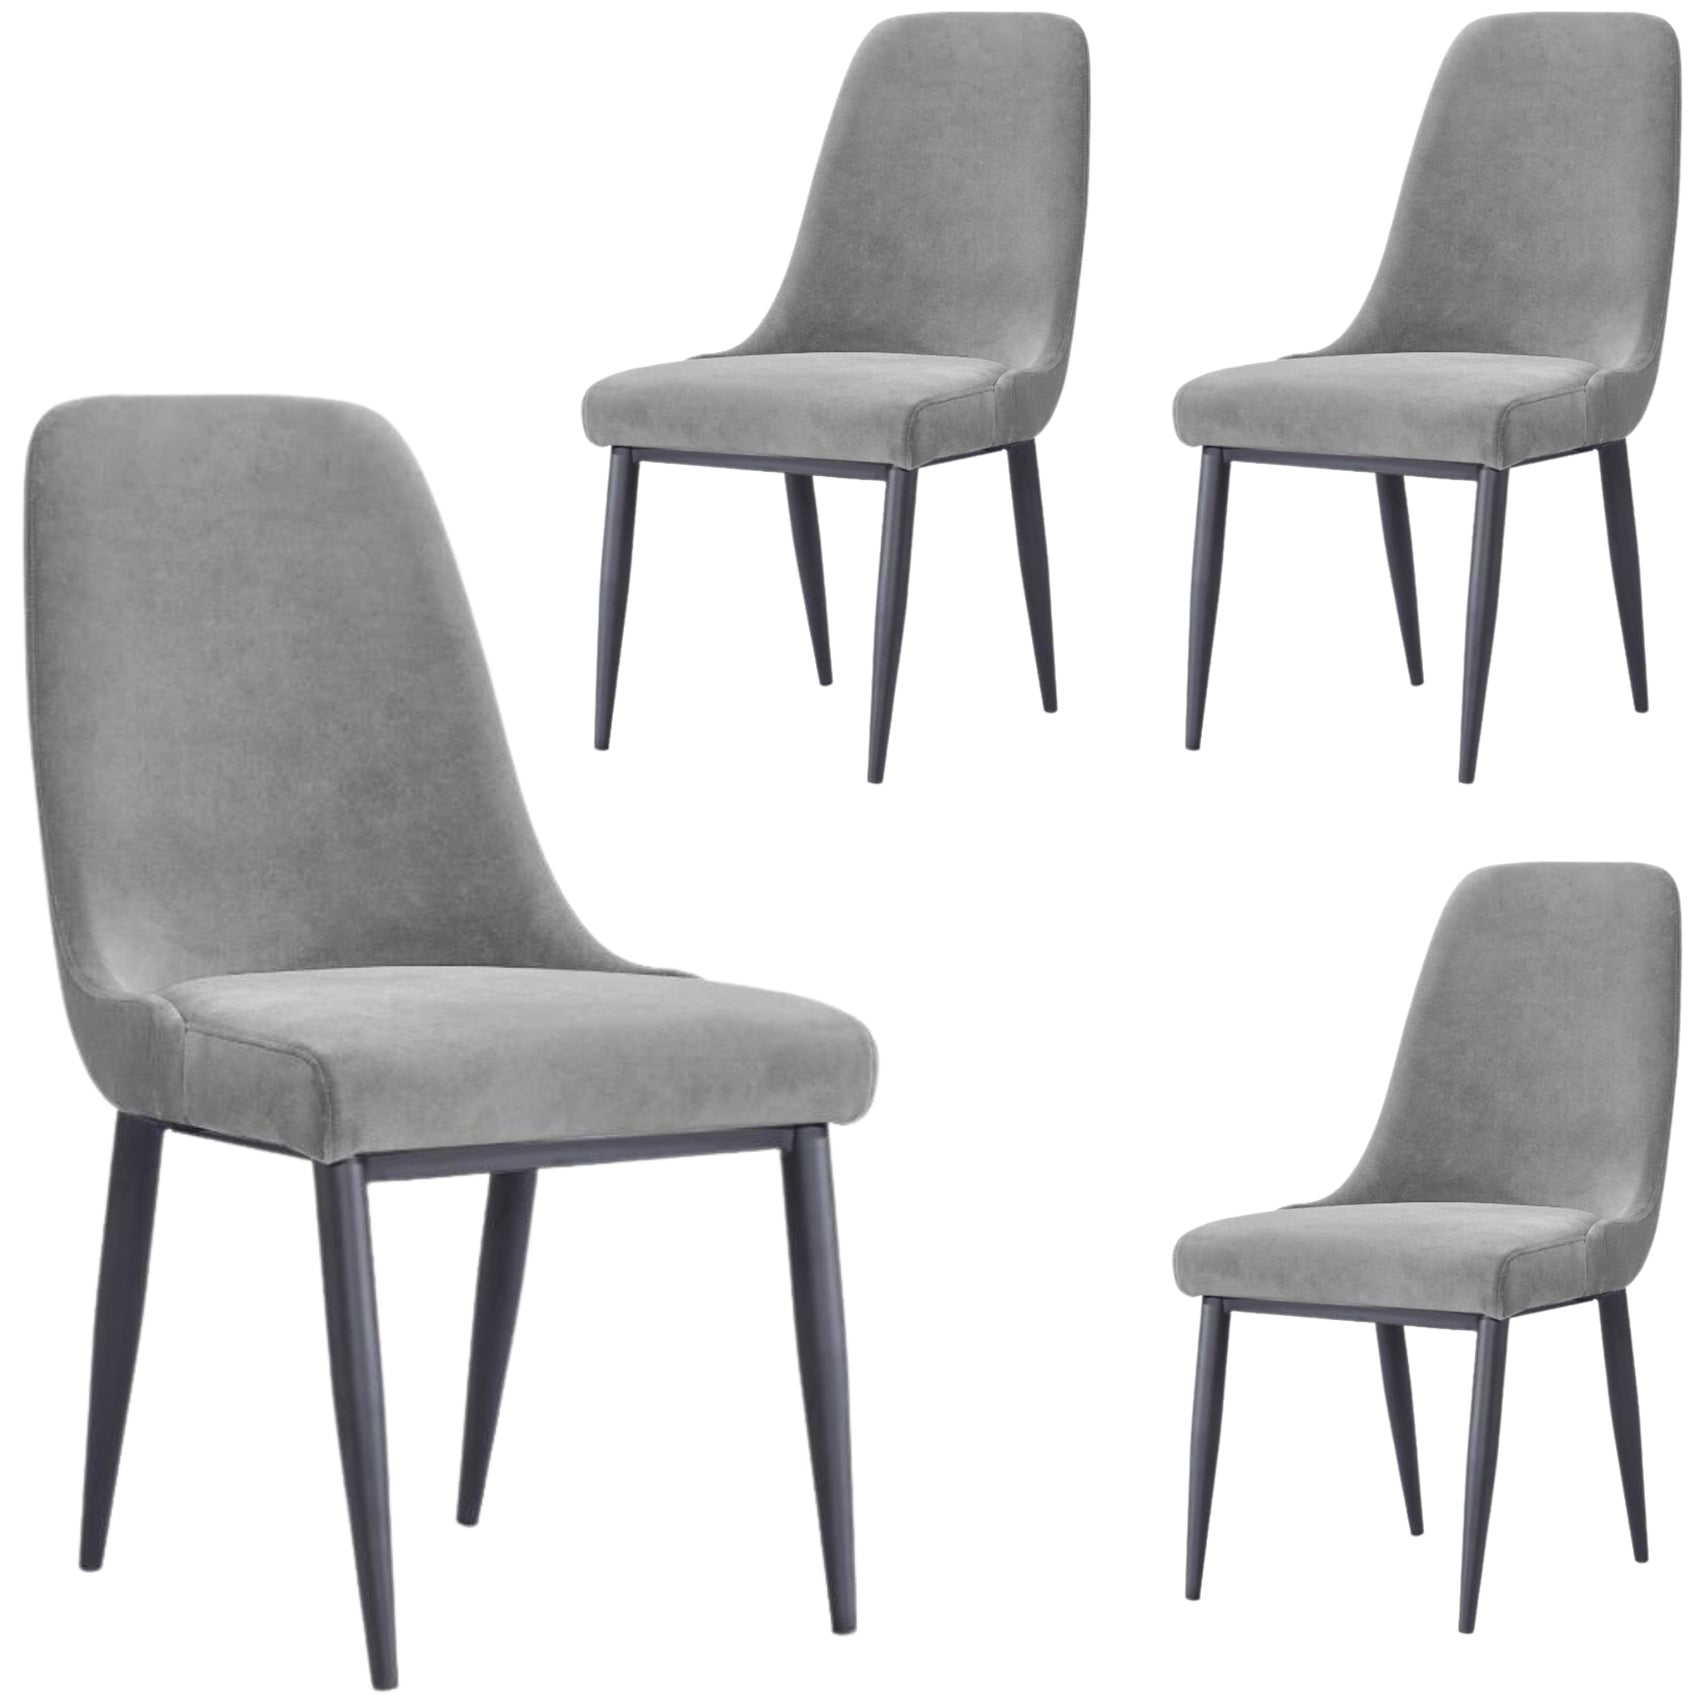 Eva Dining Chair Set of 4 Fabric Seat with Metal Frame - Grey